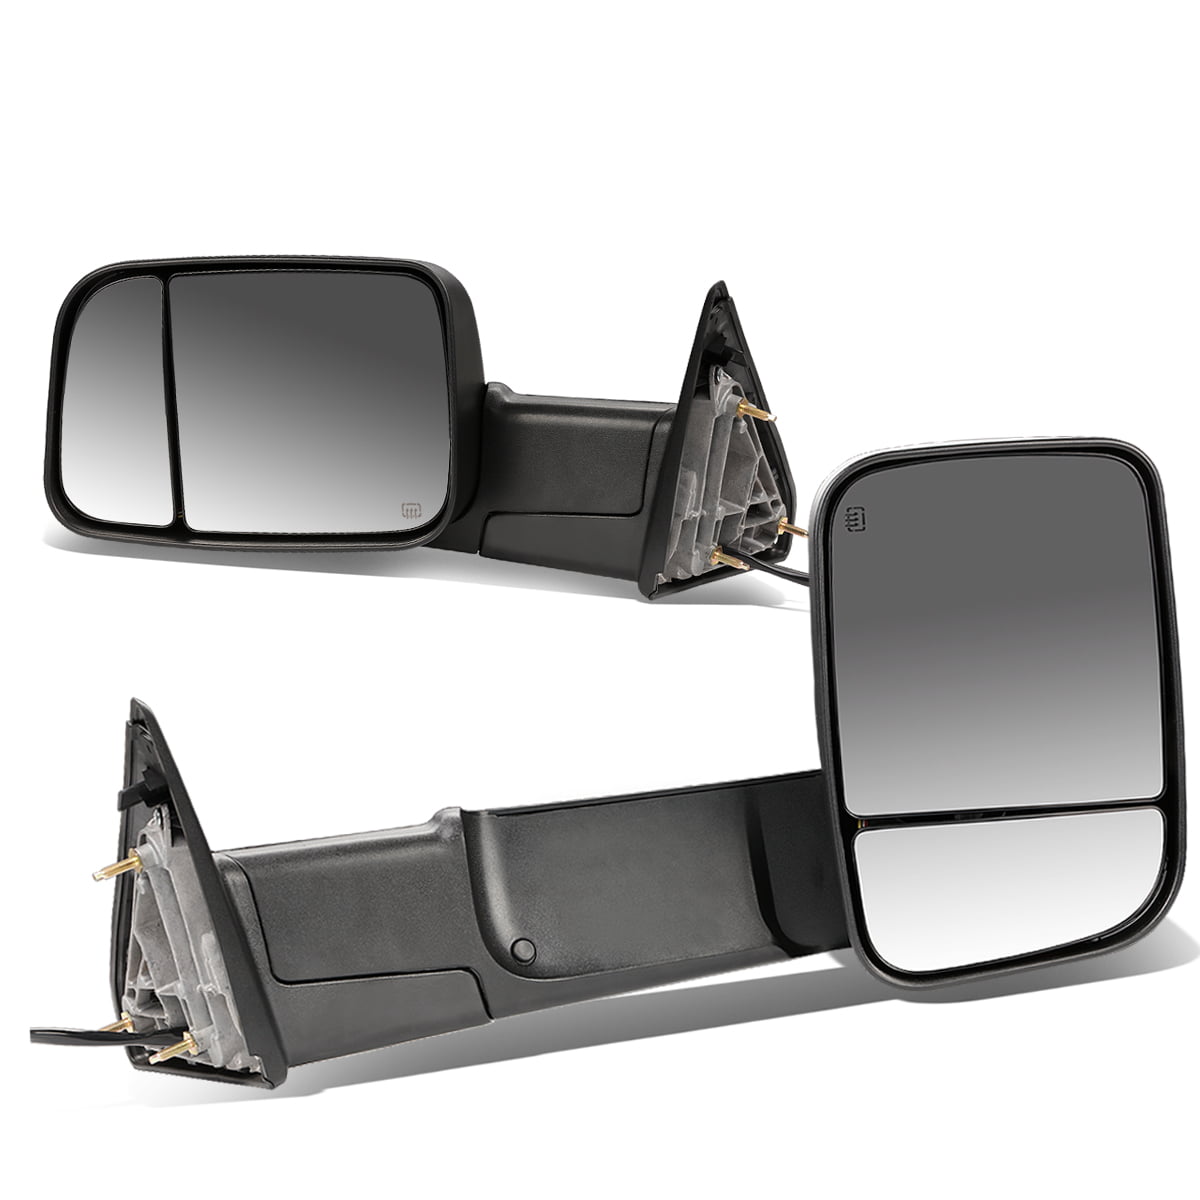 For Dodge Ram BR/BE Pair of 90 Degree Adjustable Rear View Manual Folding Towing Side Mirror Black